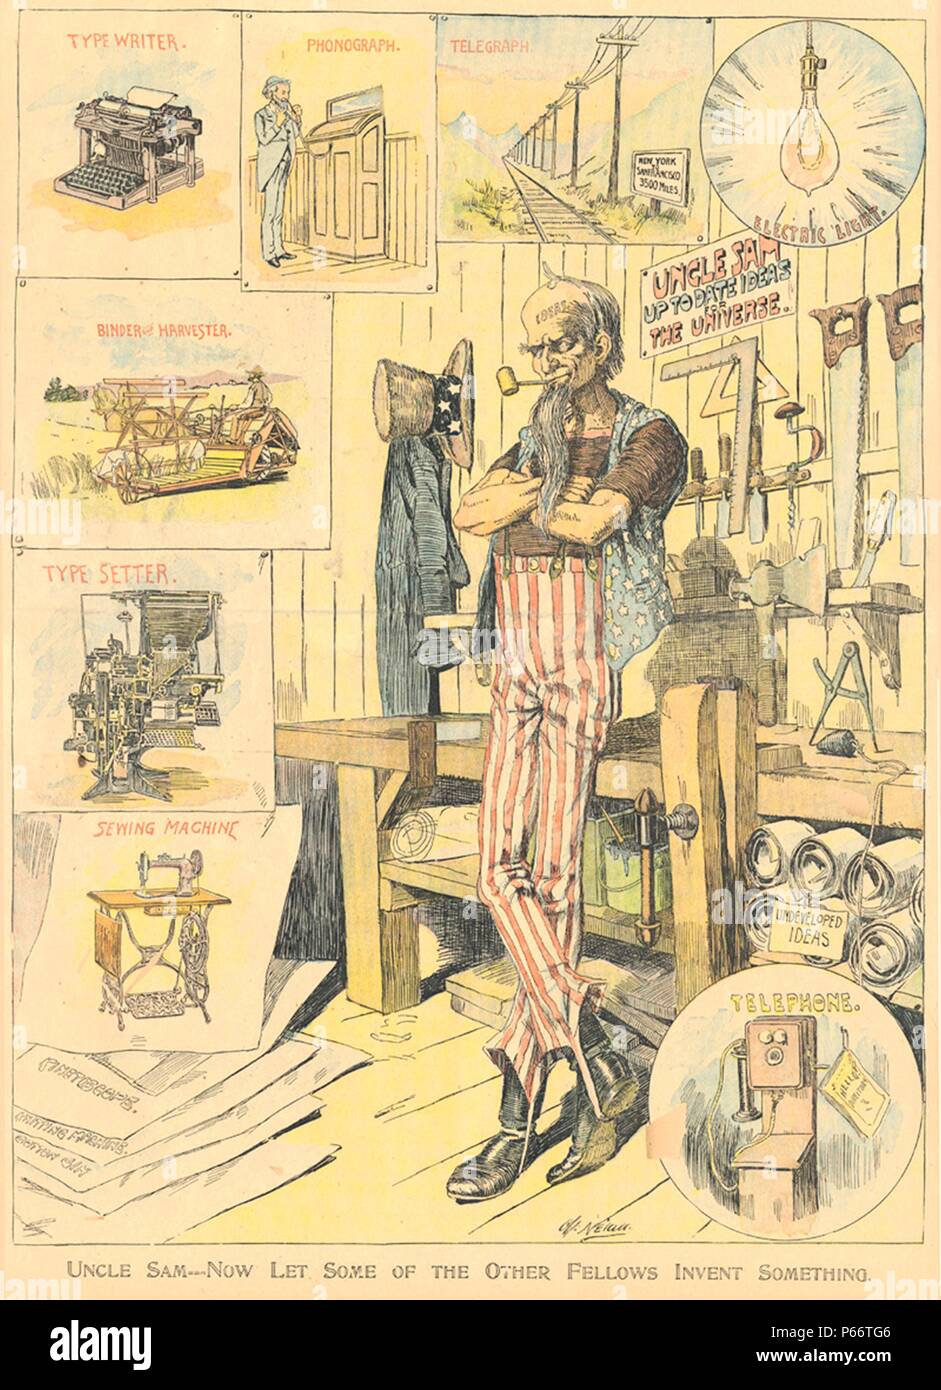 Uncle Sam--Now Let Some of the Other Fellows Invent Something by Charles Nelan, New York Herald, 1898. Colour Sunday supplements were important weapons in the newspaper wars of the late 19th century and many featured somewhat jingoistic moments such as this page by Nelan. Stock Photo